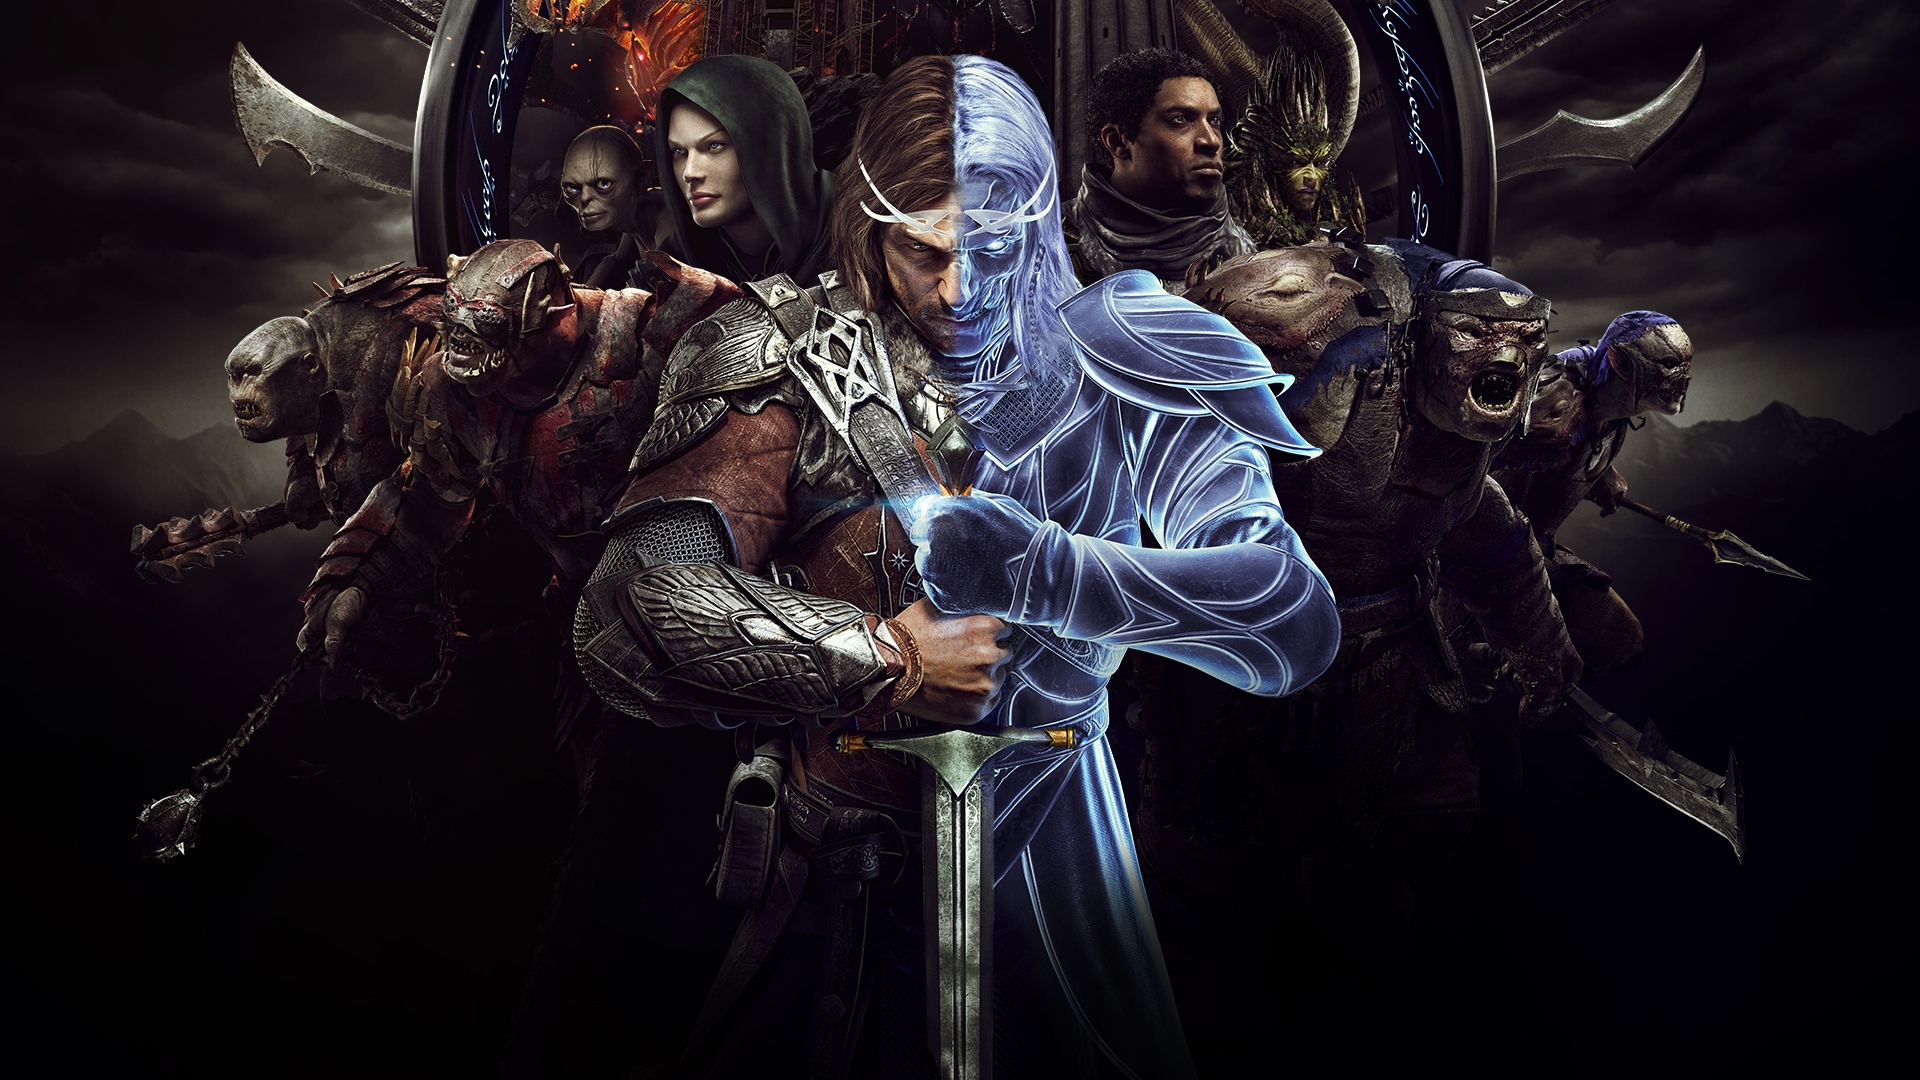 orcs, Middle Earth Shadow of War, Talion, Celebrimbor, Orc, The Lord of the Rings, Middle earth, Video games, Middle Earth: Shadow of War Wallpaper